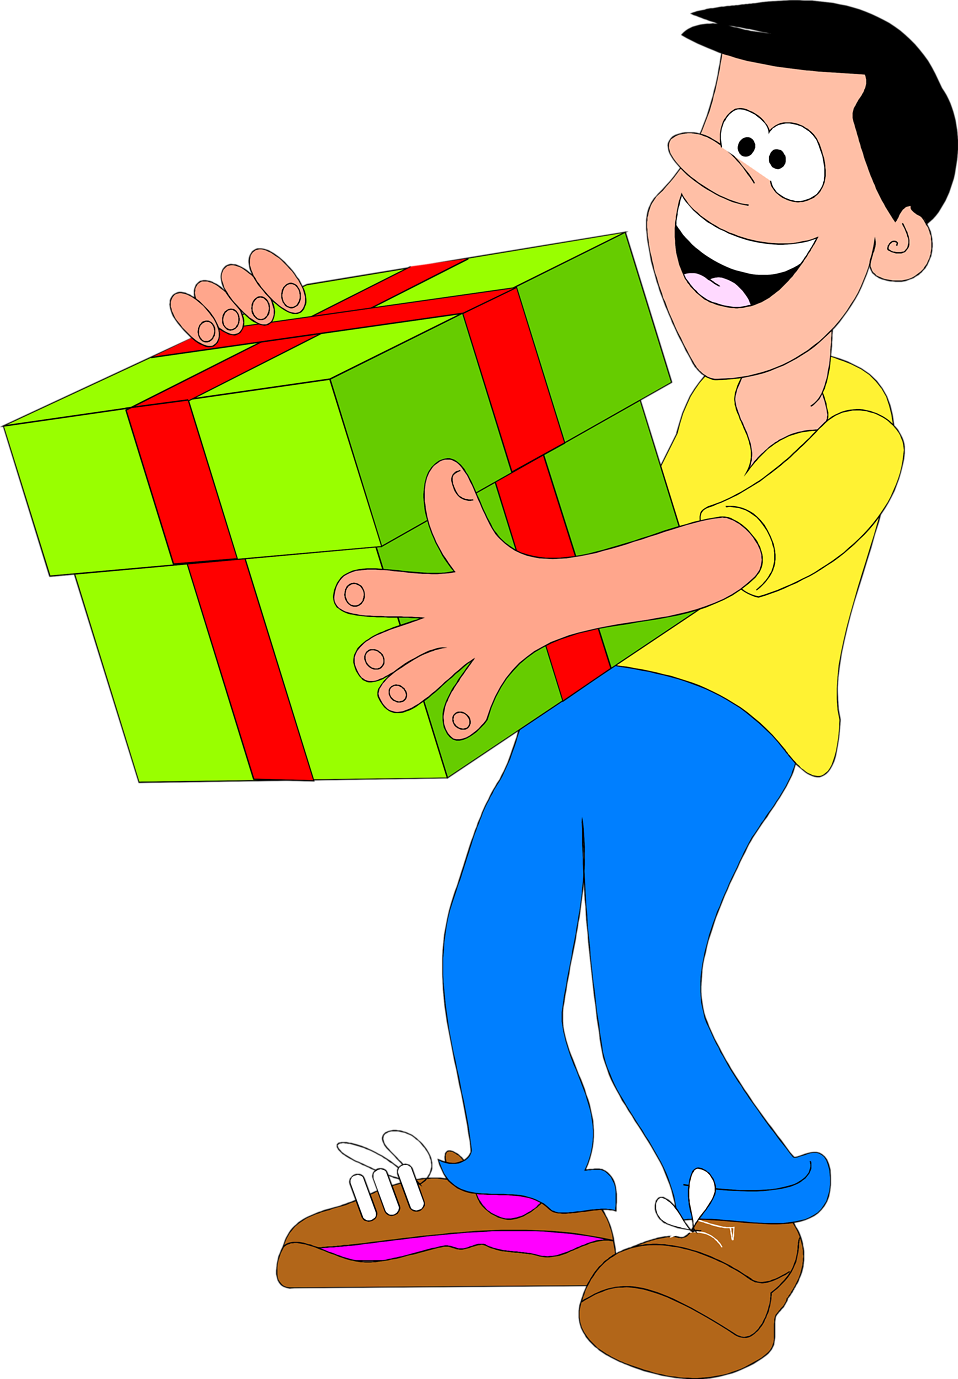 Free stock photo illustrated. Clipart present large